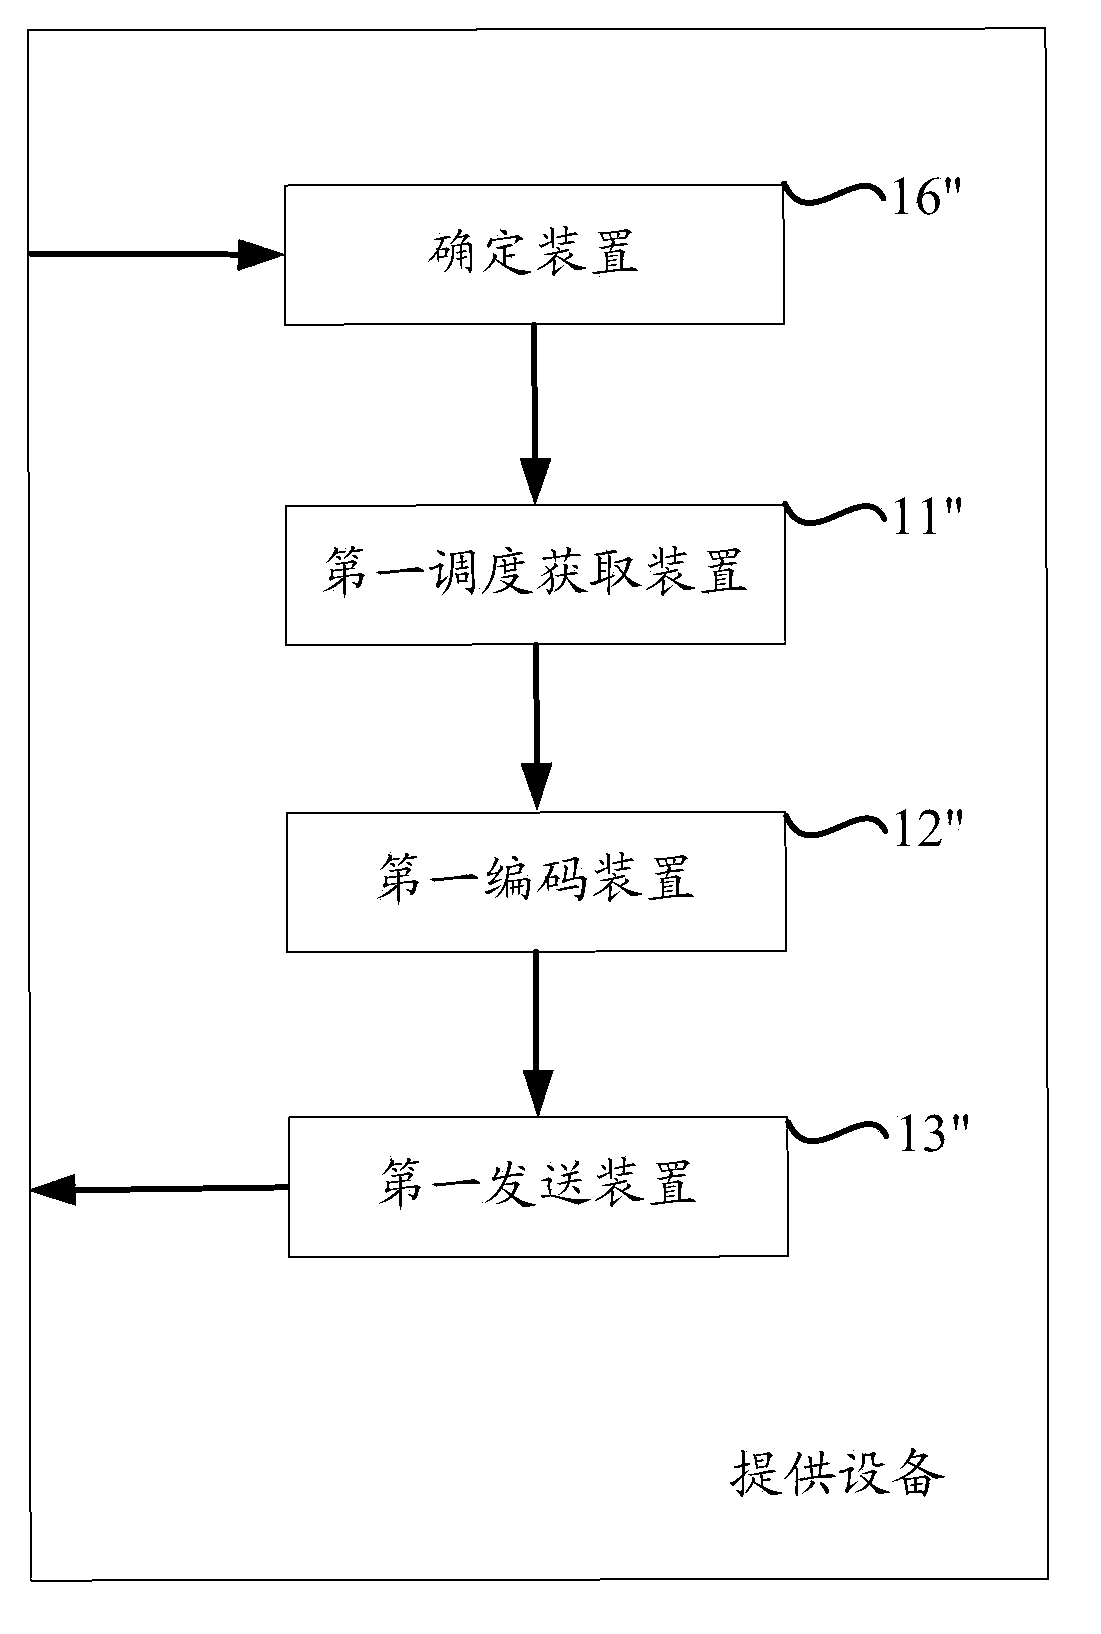 Method and device for providing system information broadcast SIB12 by eNB